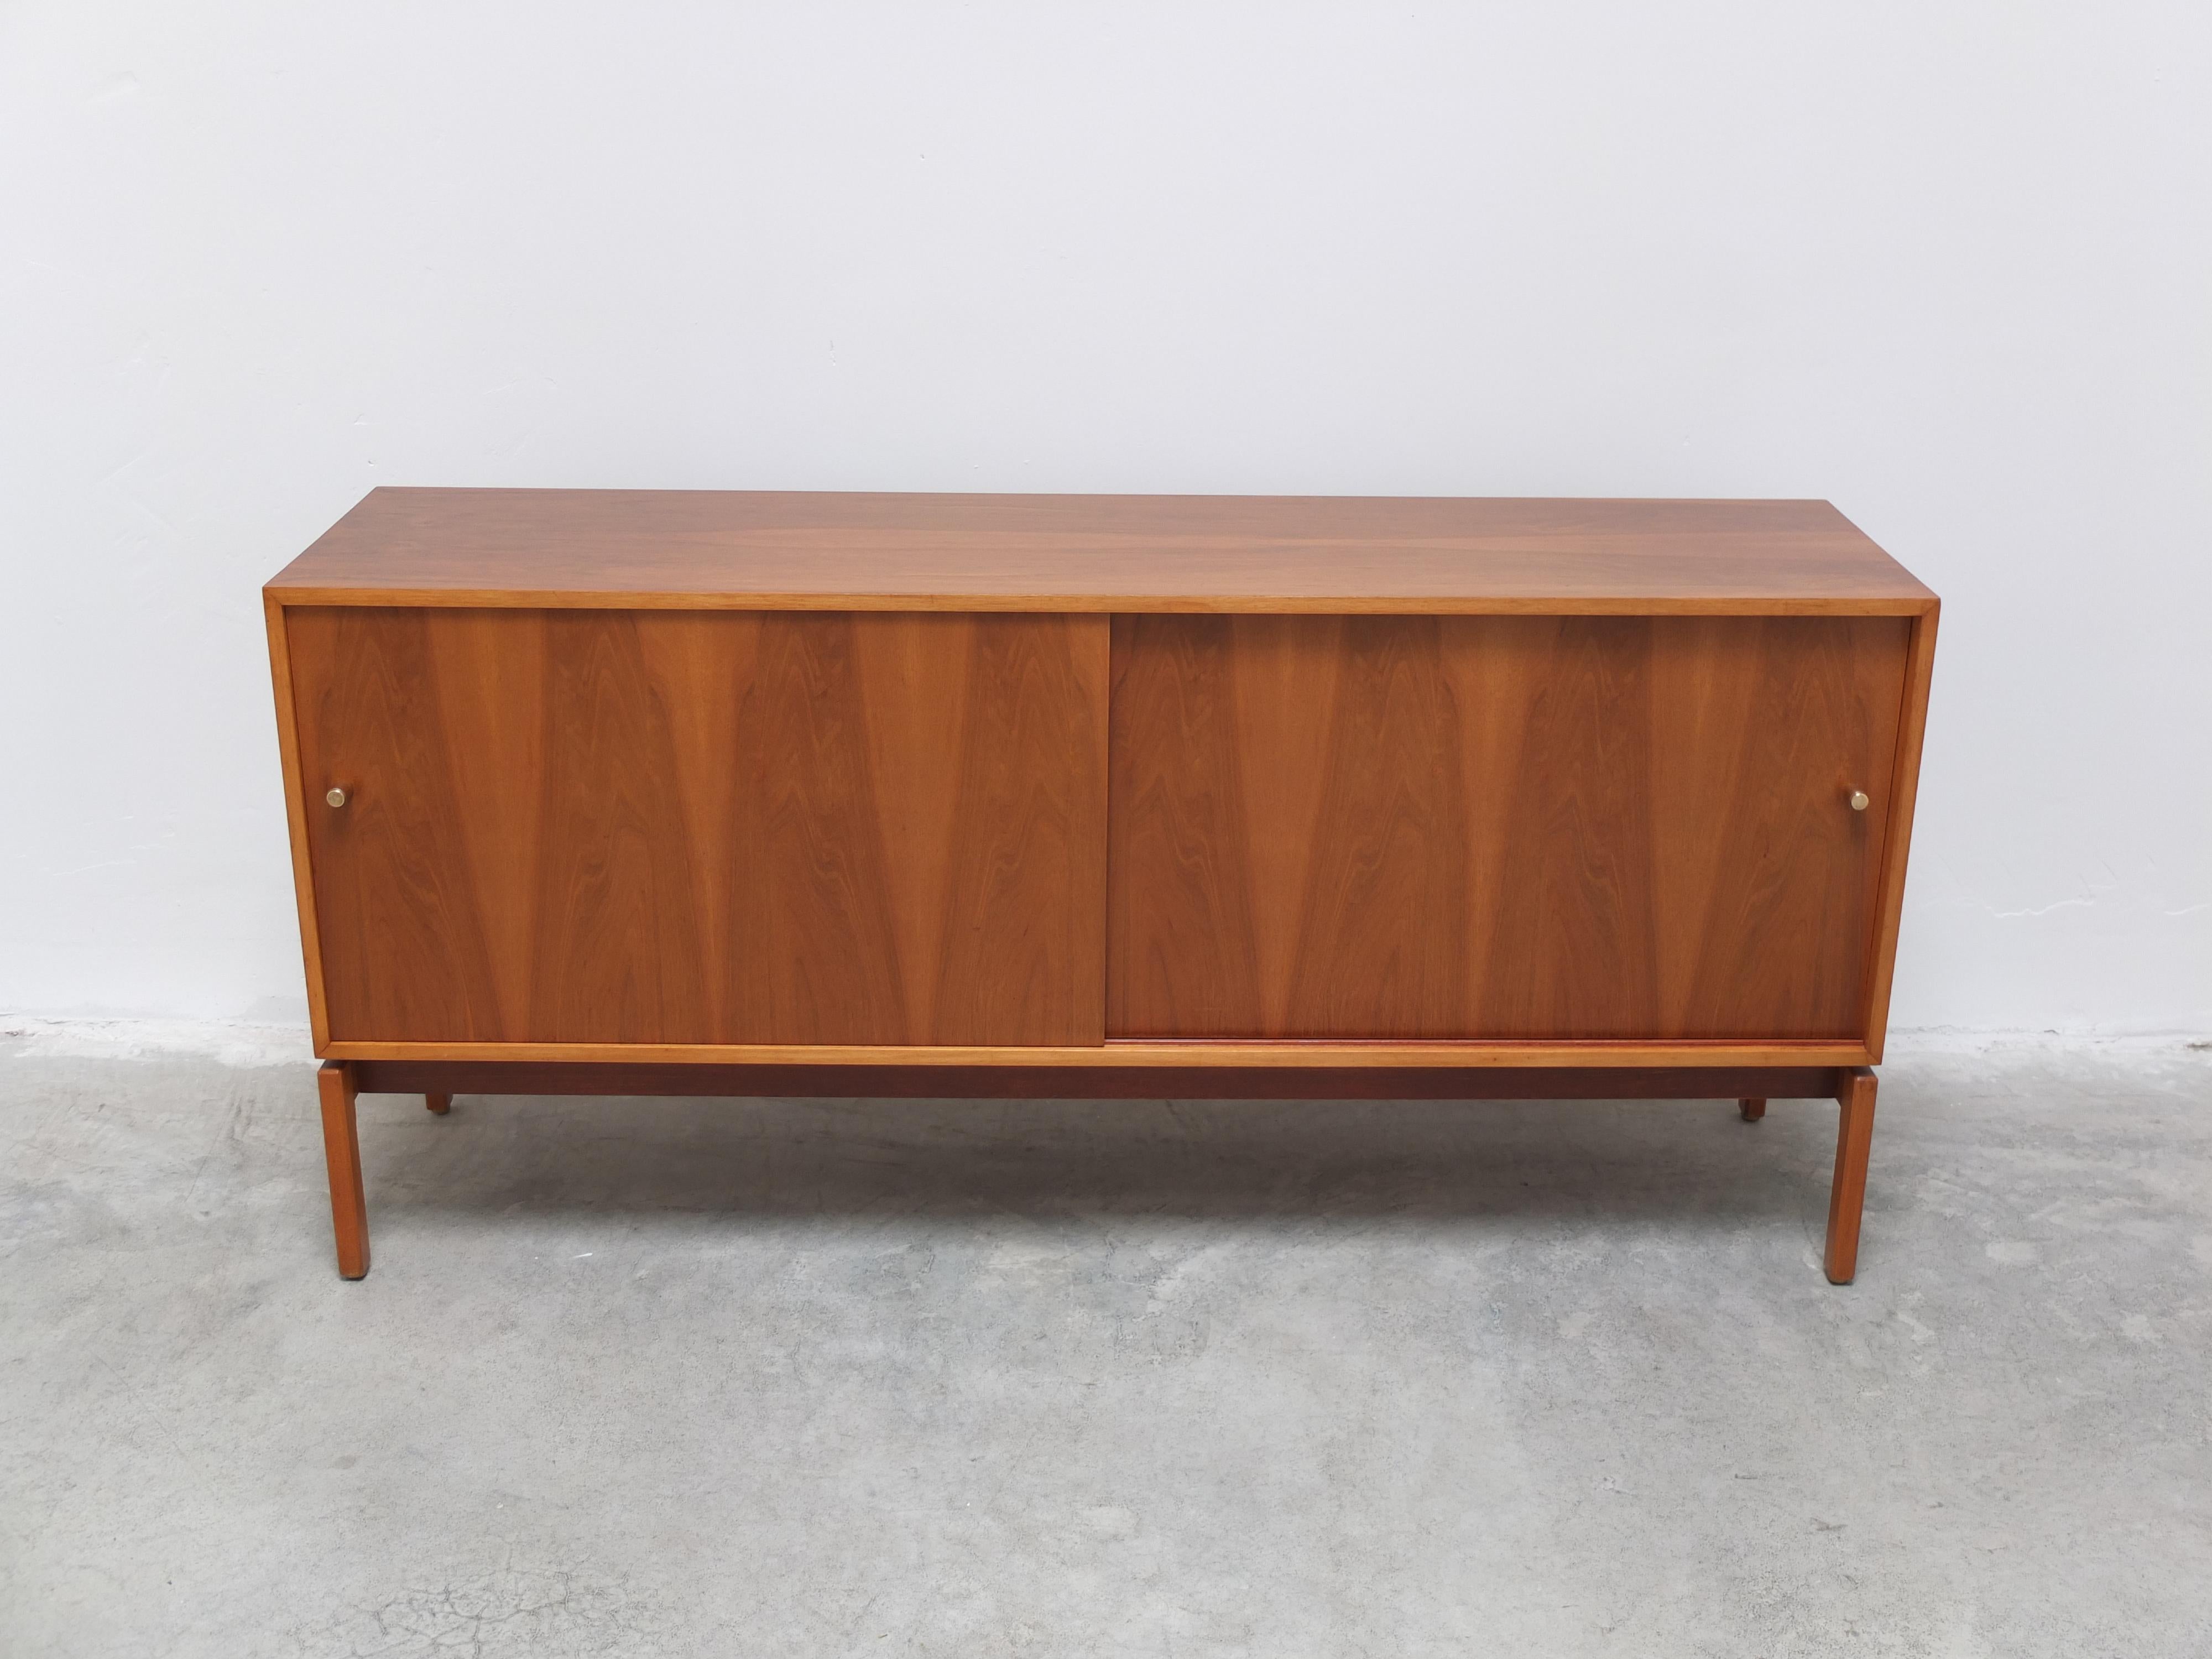 Rare compact sideboard with sliding doors from the ‘Abstracta’ series designed by Jos De Mey for Van Den Berghe-Pauvers during the 1960s. Highly decorative thanks to the beautiful walnut wood grain combined with the signature brass pulls. Remarkable